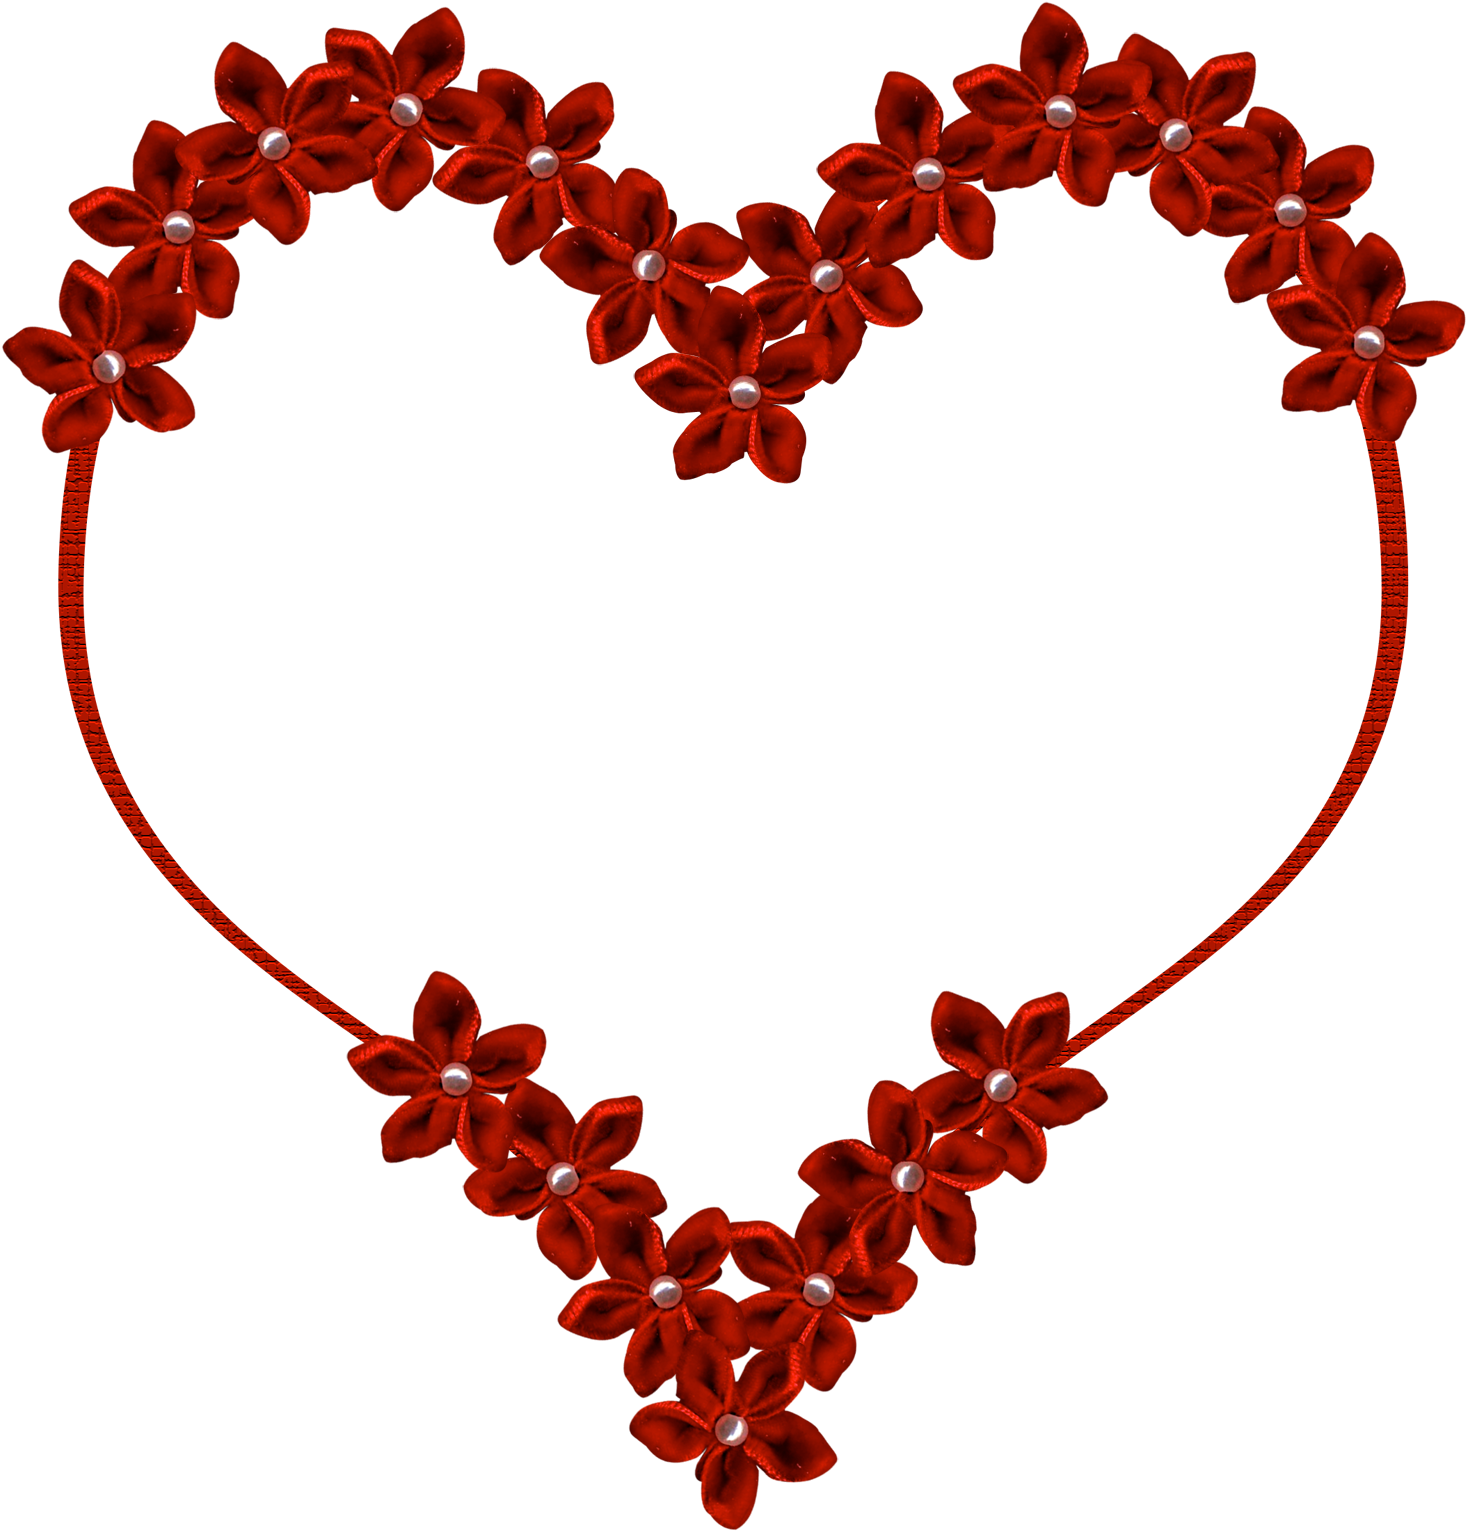 Valentines Heart - Flower And Heart Designs (1500x1560)